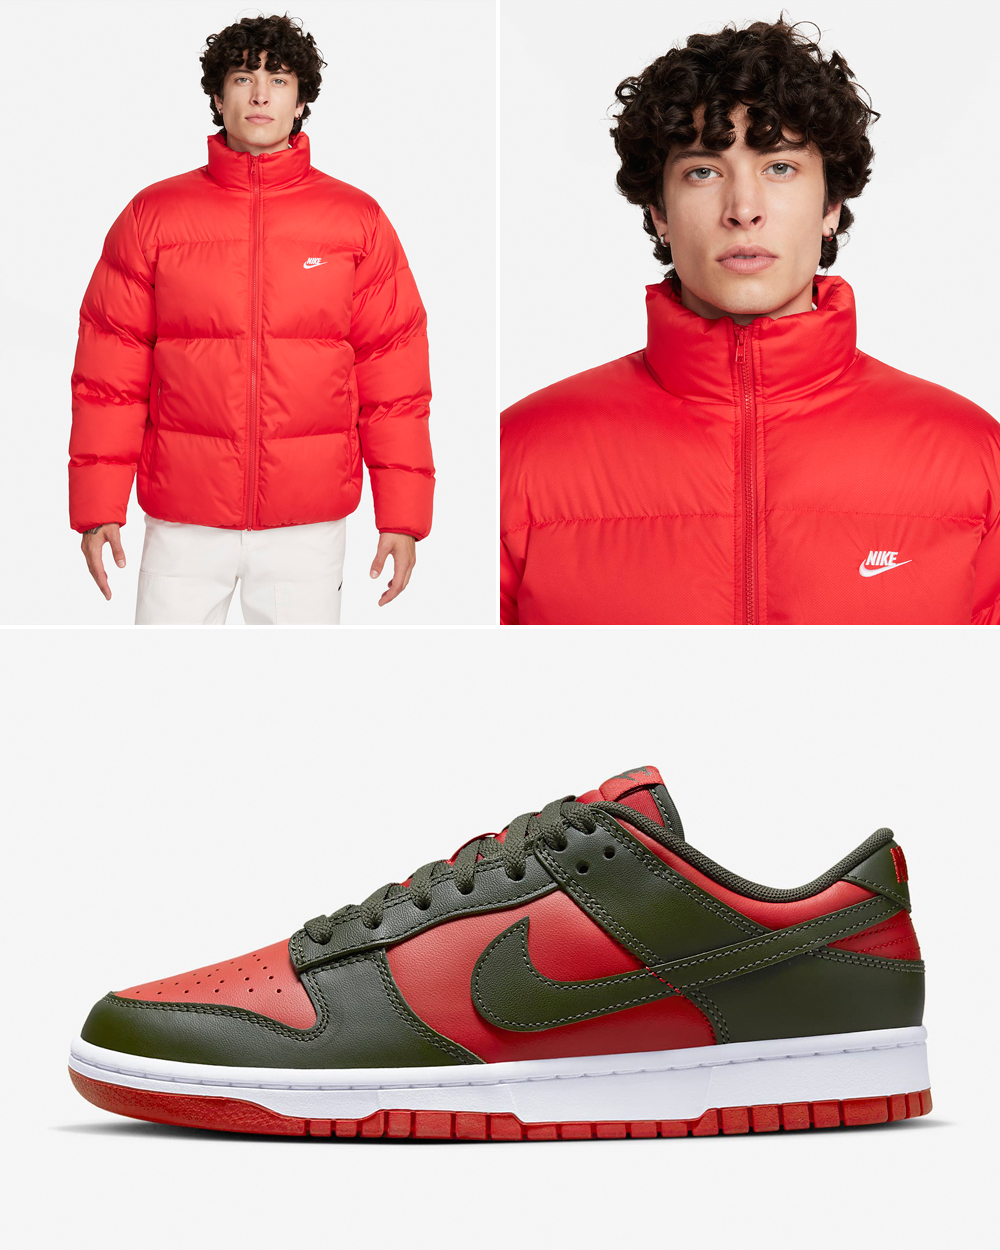 Nike-Dunk-Low-Mystic-Red-Puffer-Jacket-Matching-Outfit